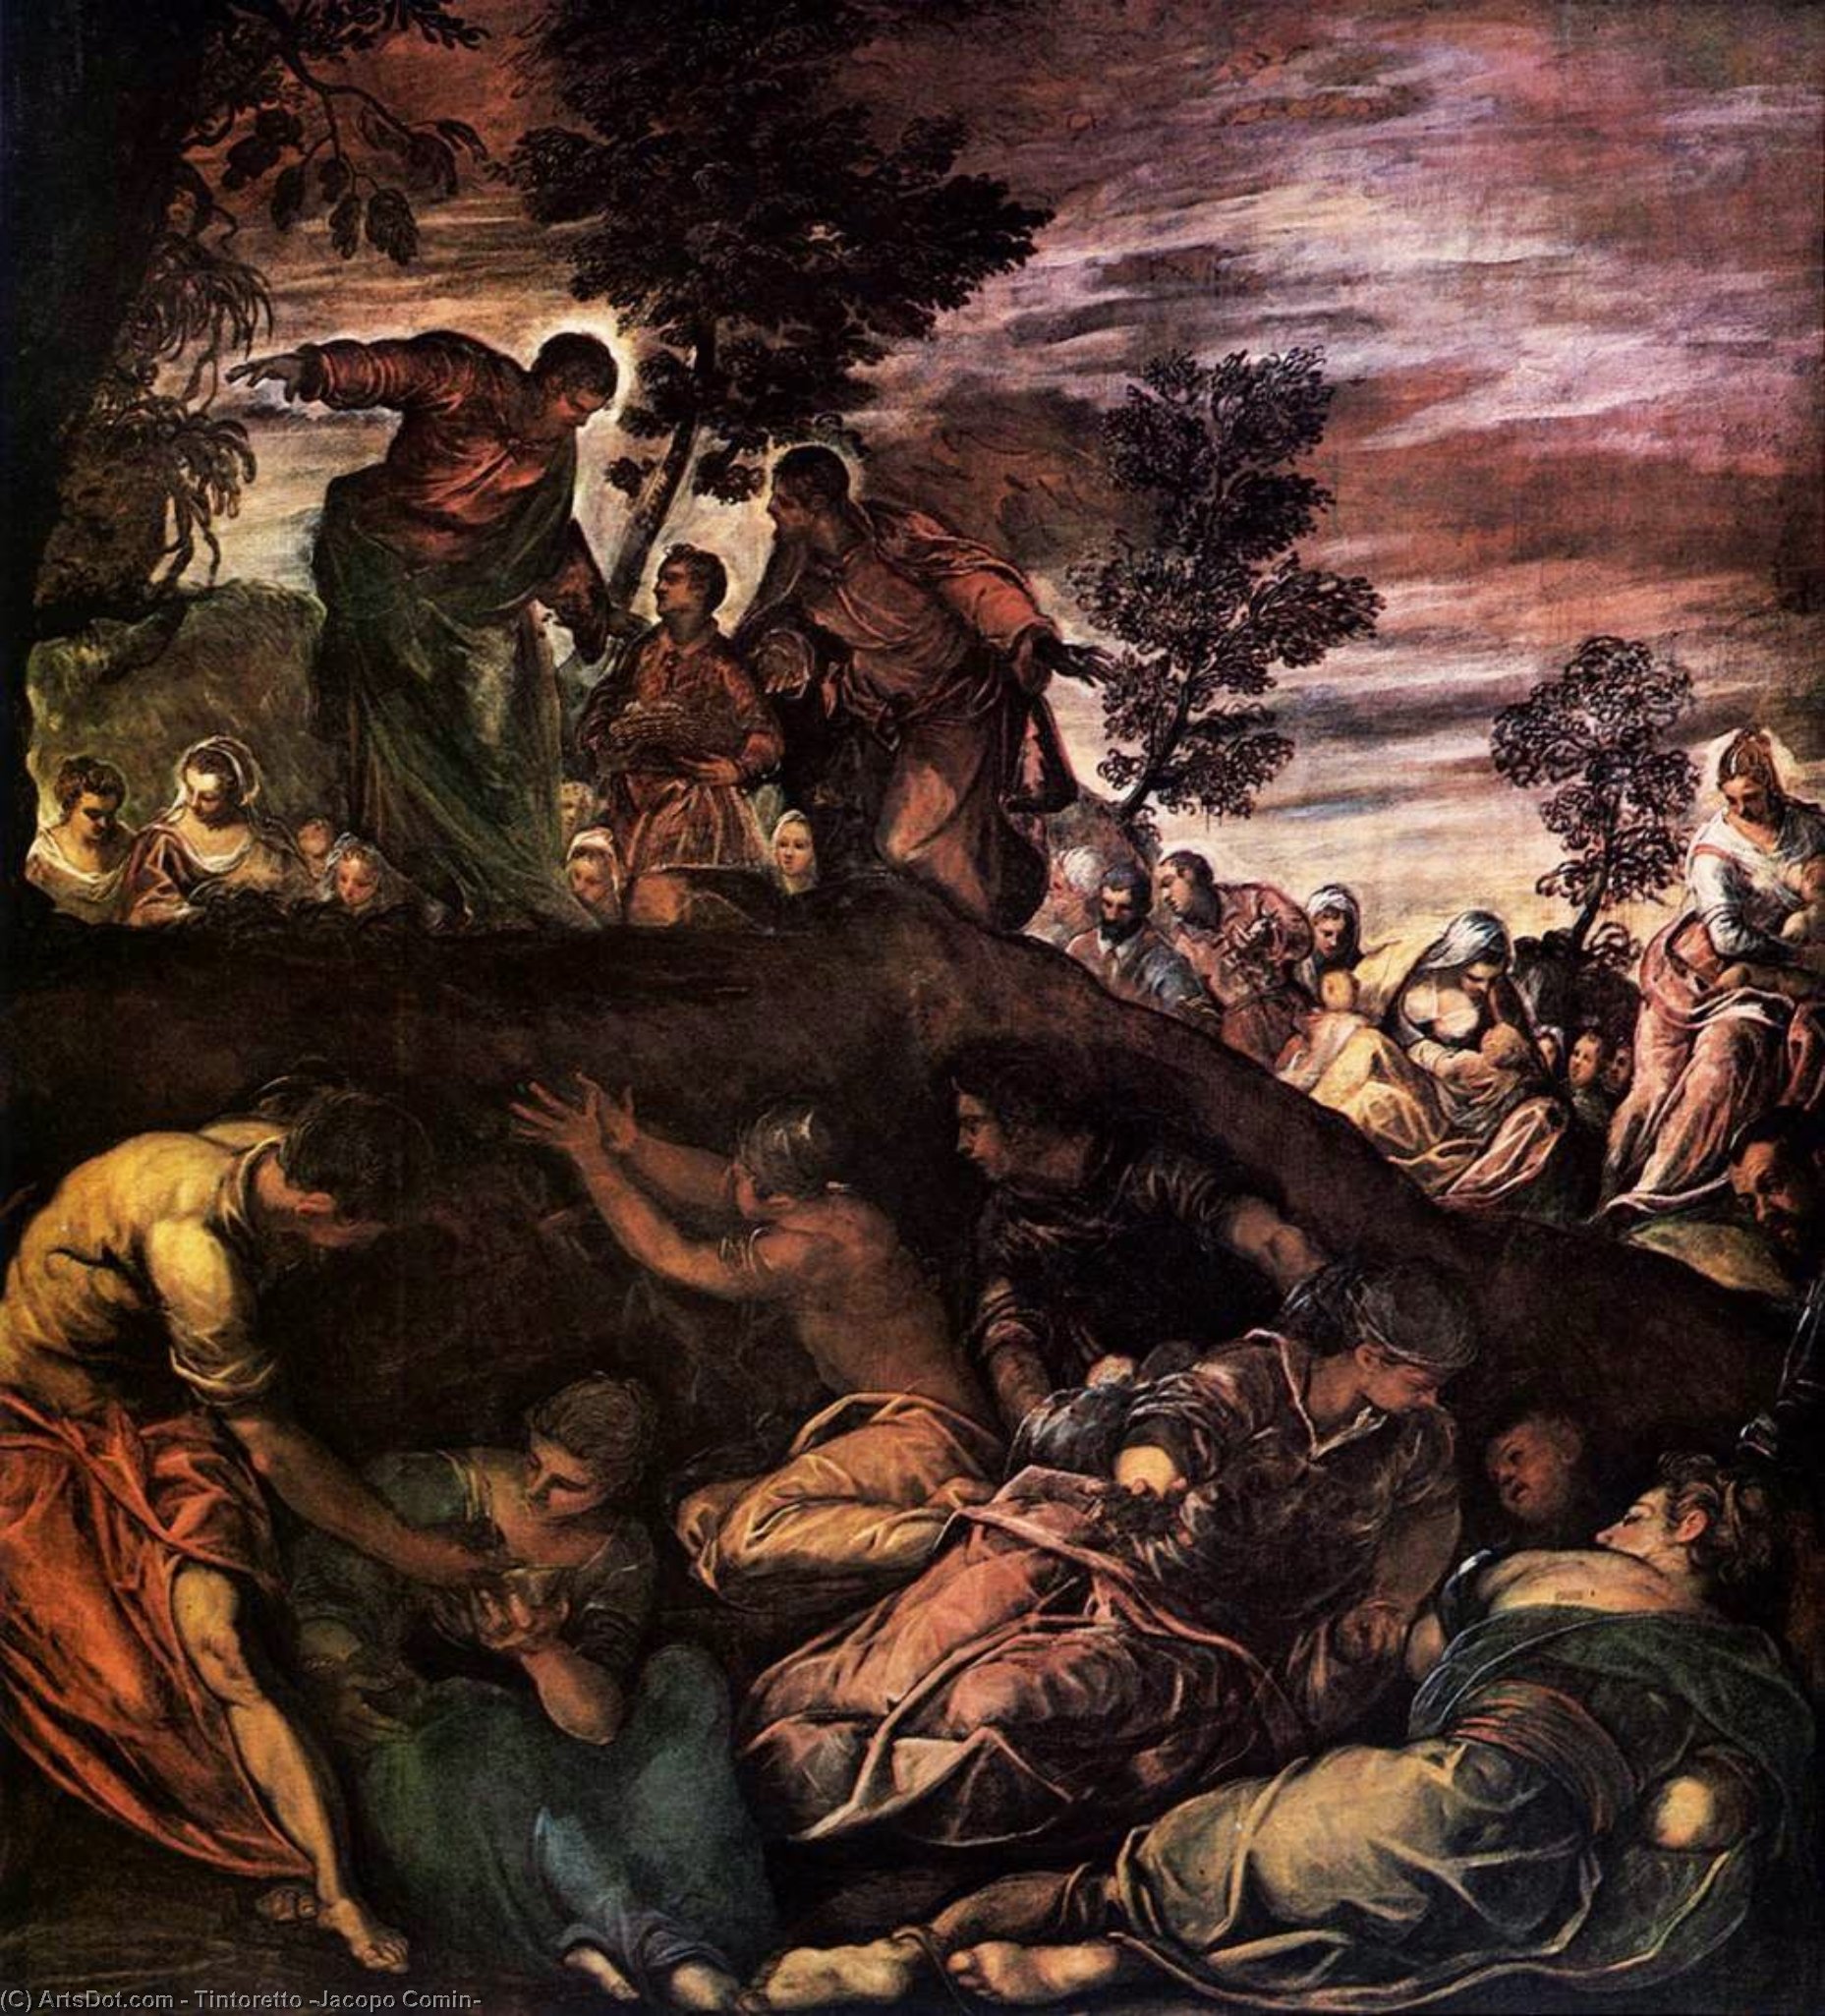 WikiOO.org - Güzel Sanatlar Ansiklopedisi - Resim, Resimler Tintoretto (Jacopo Comin) - The Miracle of the Loaves and Fishes